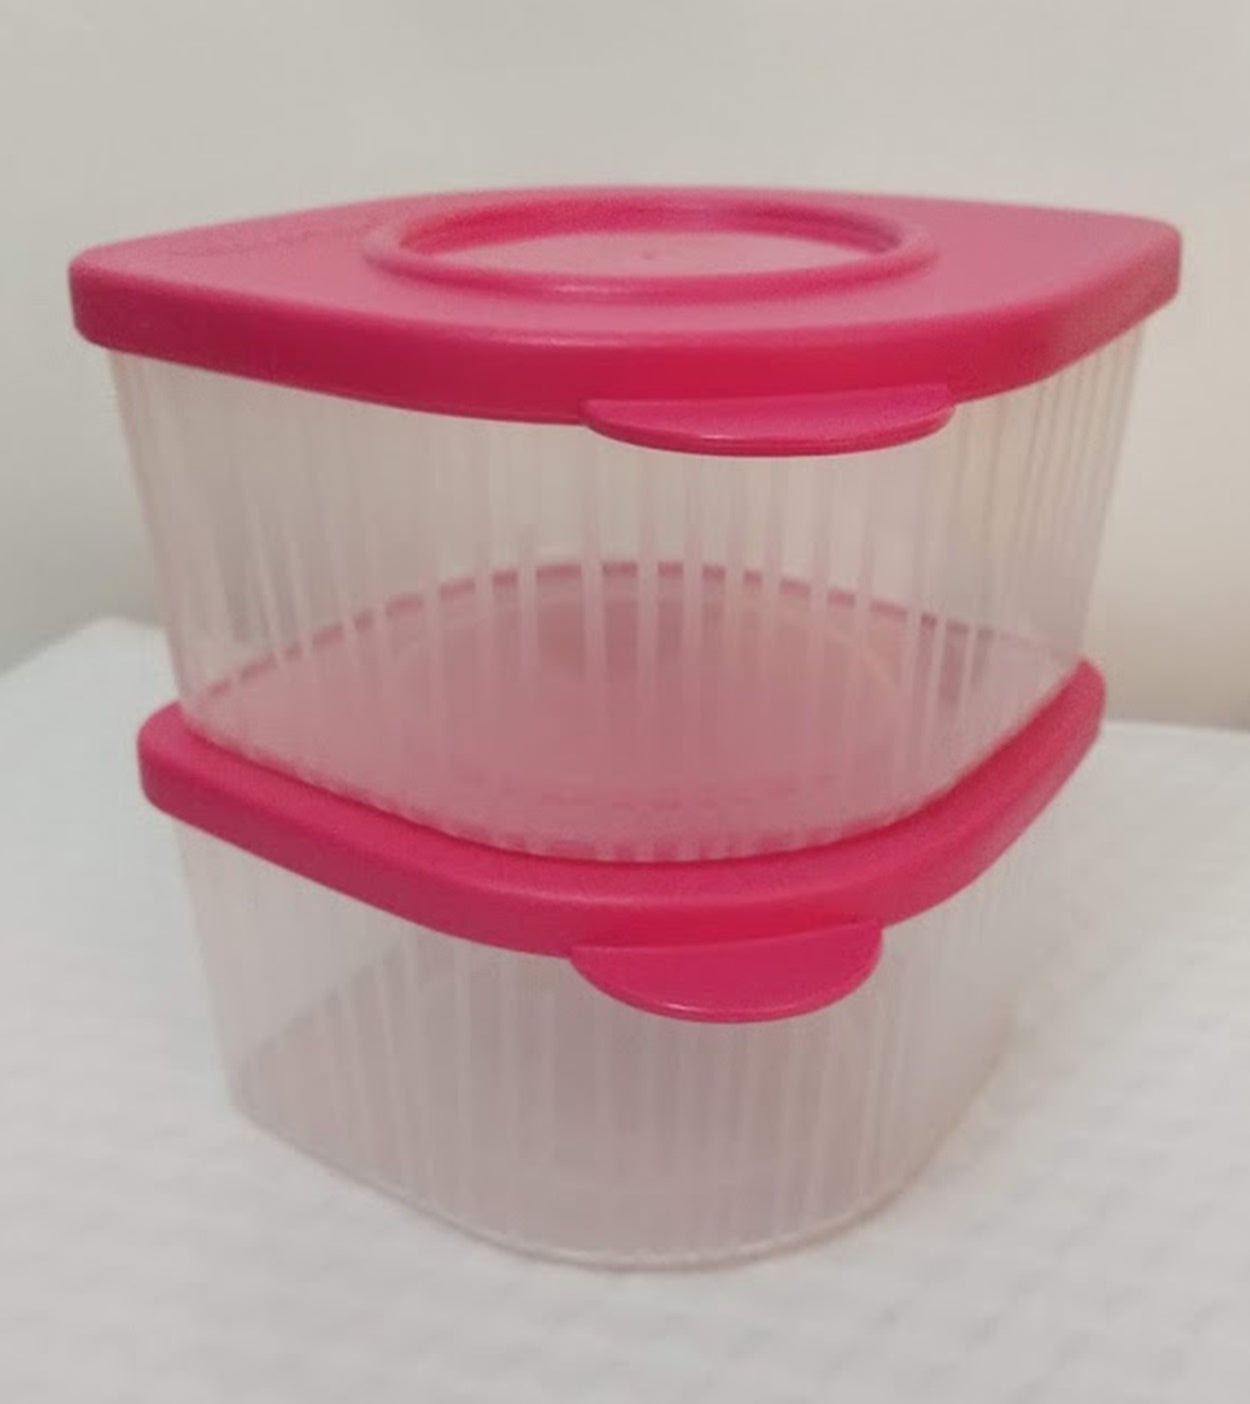 TUPPERWARE TWO 2-cup Sheer Fresh N Cool Square Round Storage Containers Keepers Rubine Red / Pink - Plastic Glass and Wax